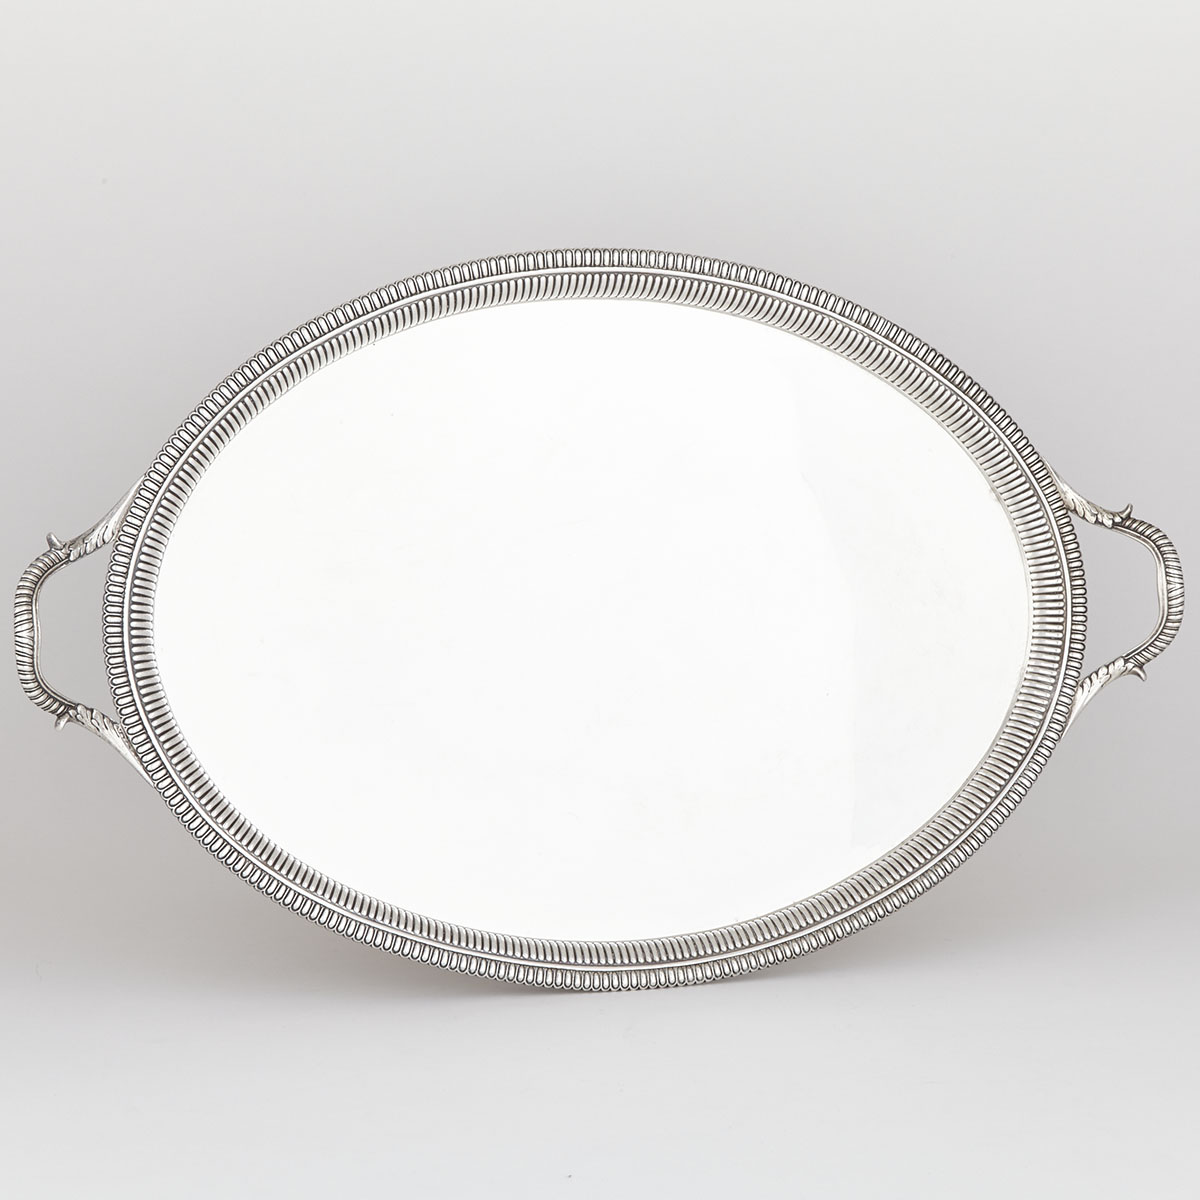 George III Silver Two-Handled Oval Serving Tray, Thomas Hannam & John Crouch, London, 1804